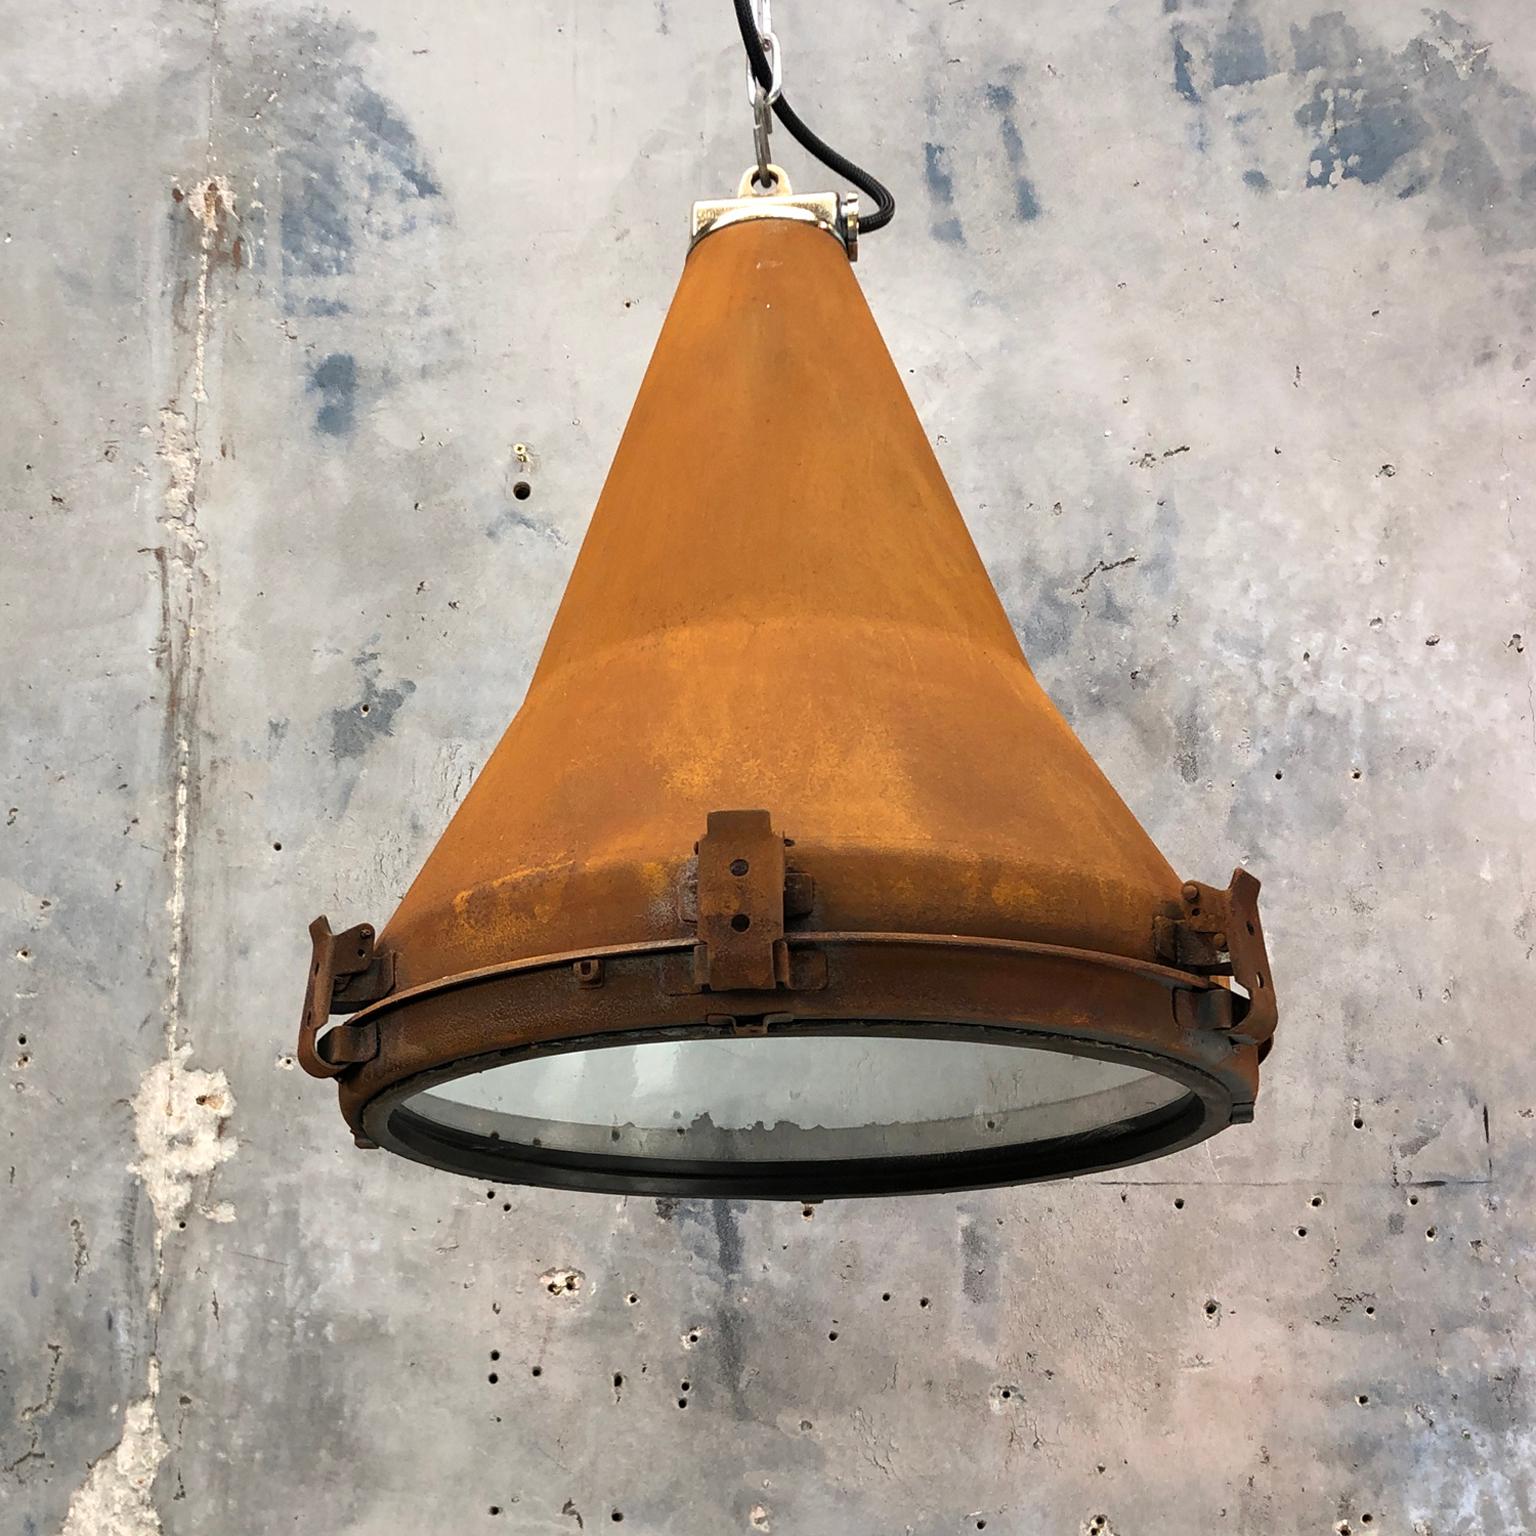 Late 20th Century 1970s Korean Vintage Industrial Steel Conical Pendant Light with Applied Rust